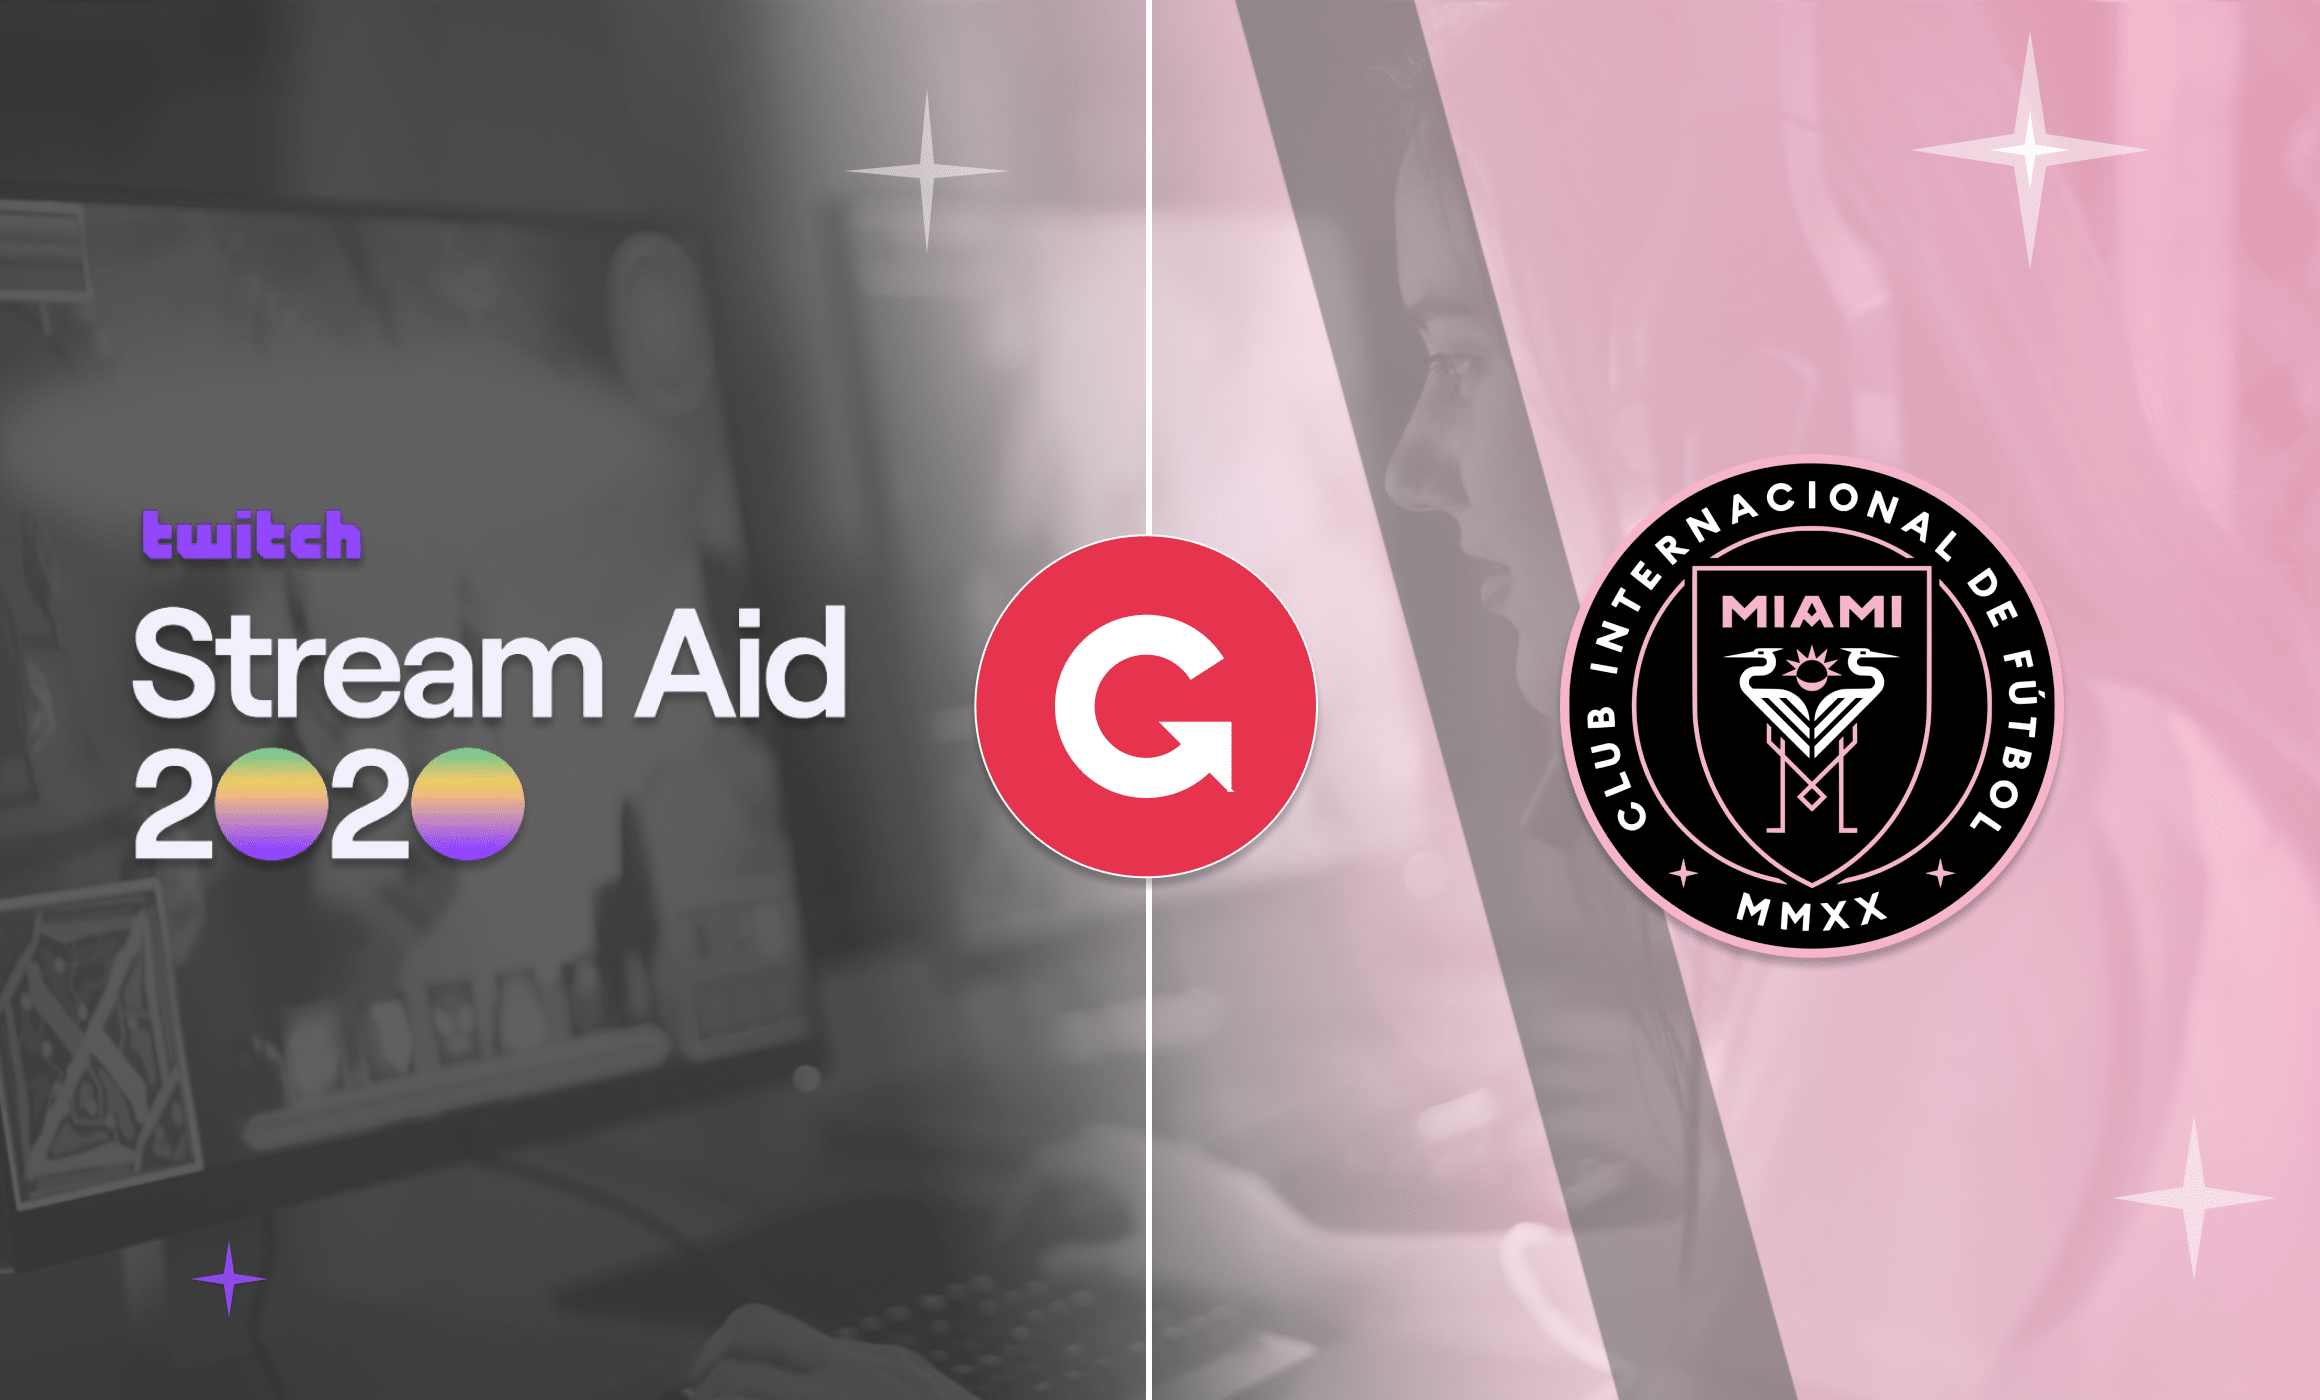 Inter Miami CF partners with Grabyo for Twitch Stream Aid 2020 broadcast